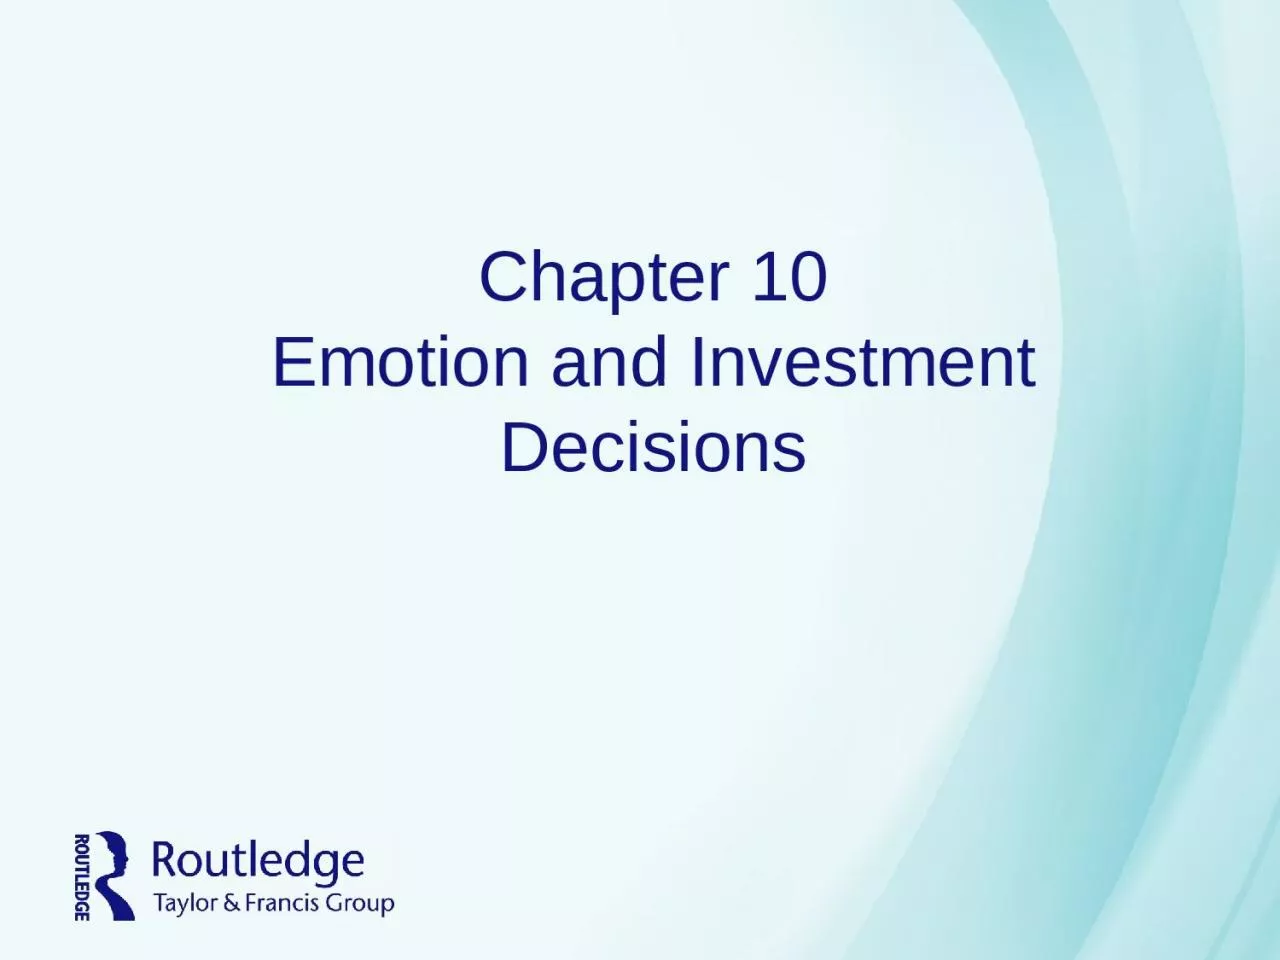 Chapter 10 Emotion and Investment Decisions